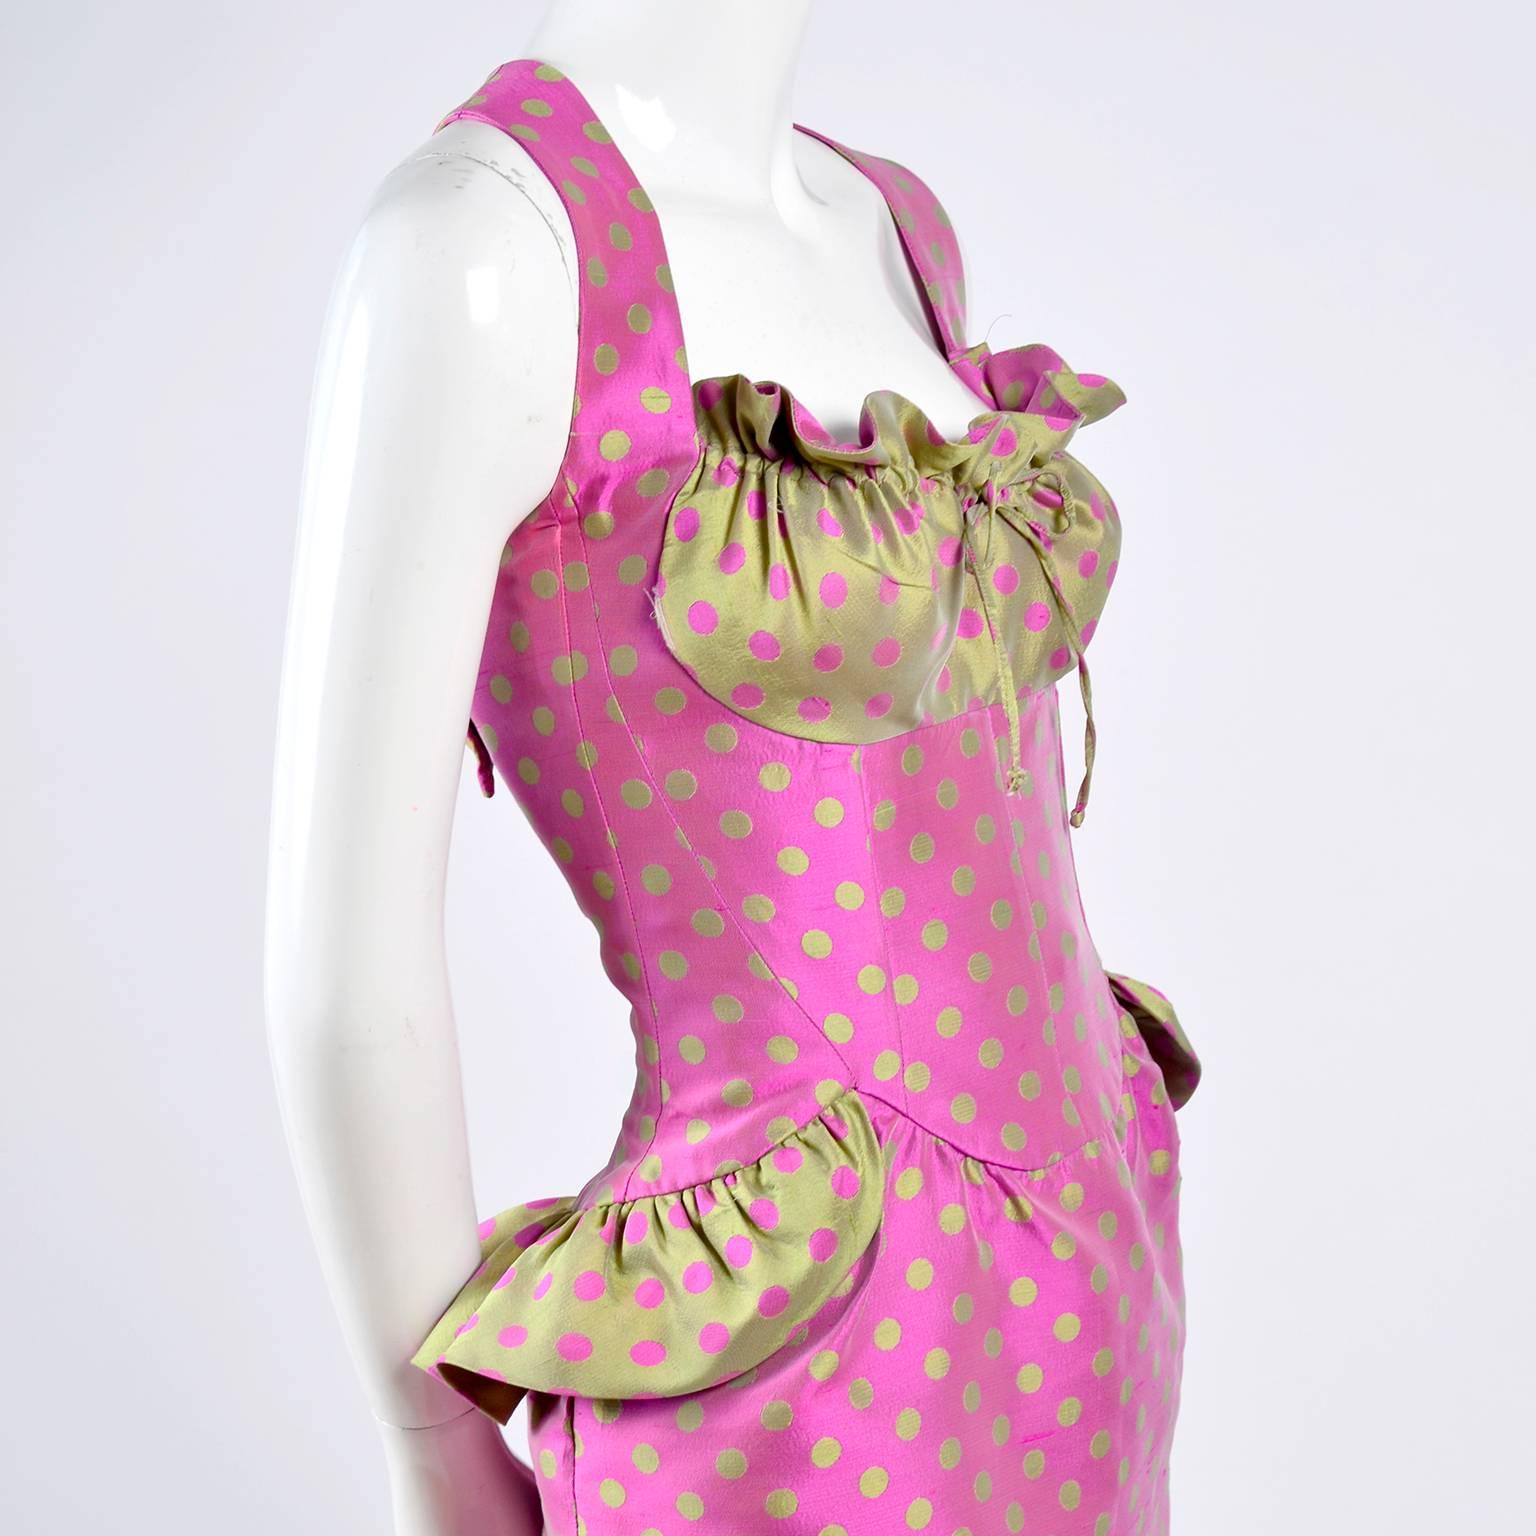 This vintage Christian Lacroix dress is from an early 1990's Spring Summer collection and is in one of his iconic styles. The dress is pink with lime green dots and the gathered bust area and ruffled side peplums are in green with pink dots.  We